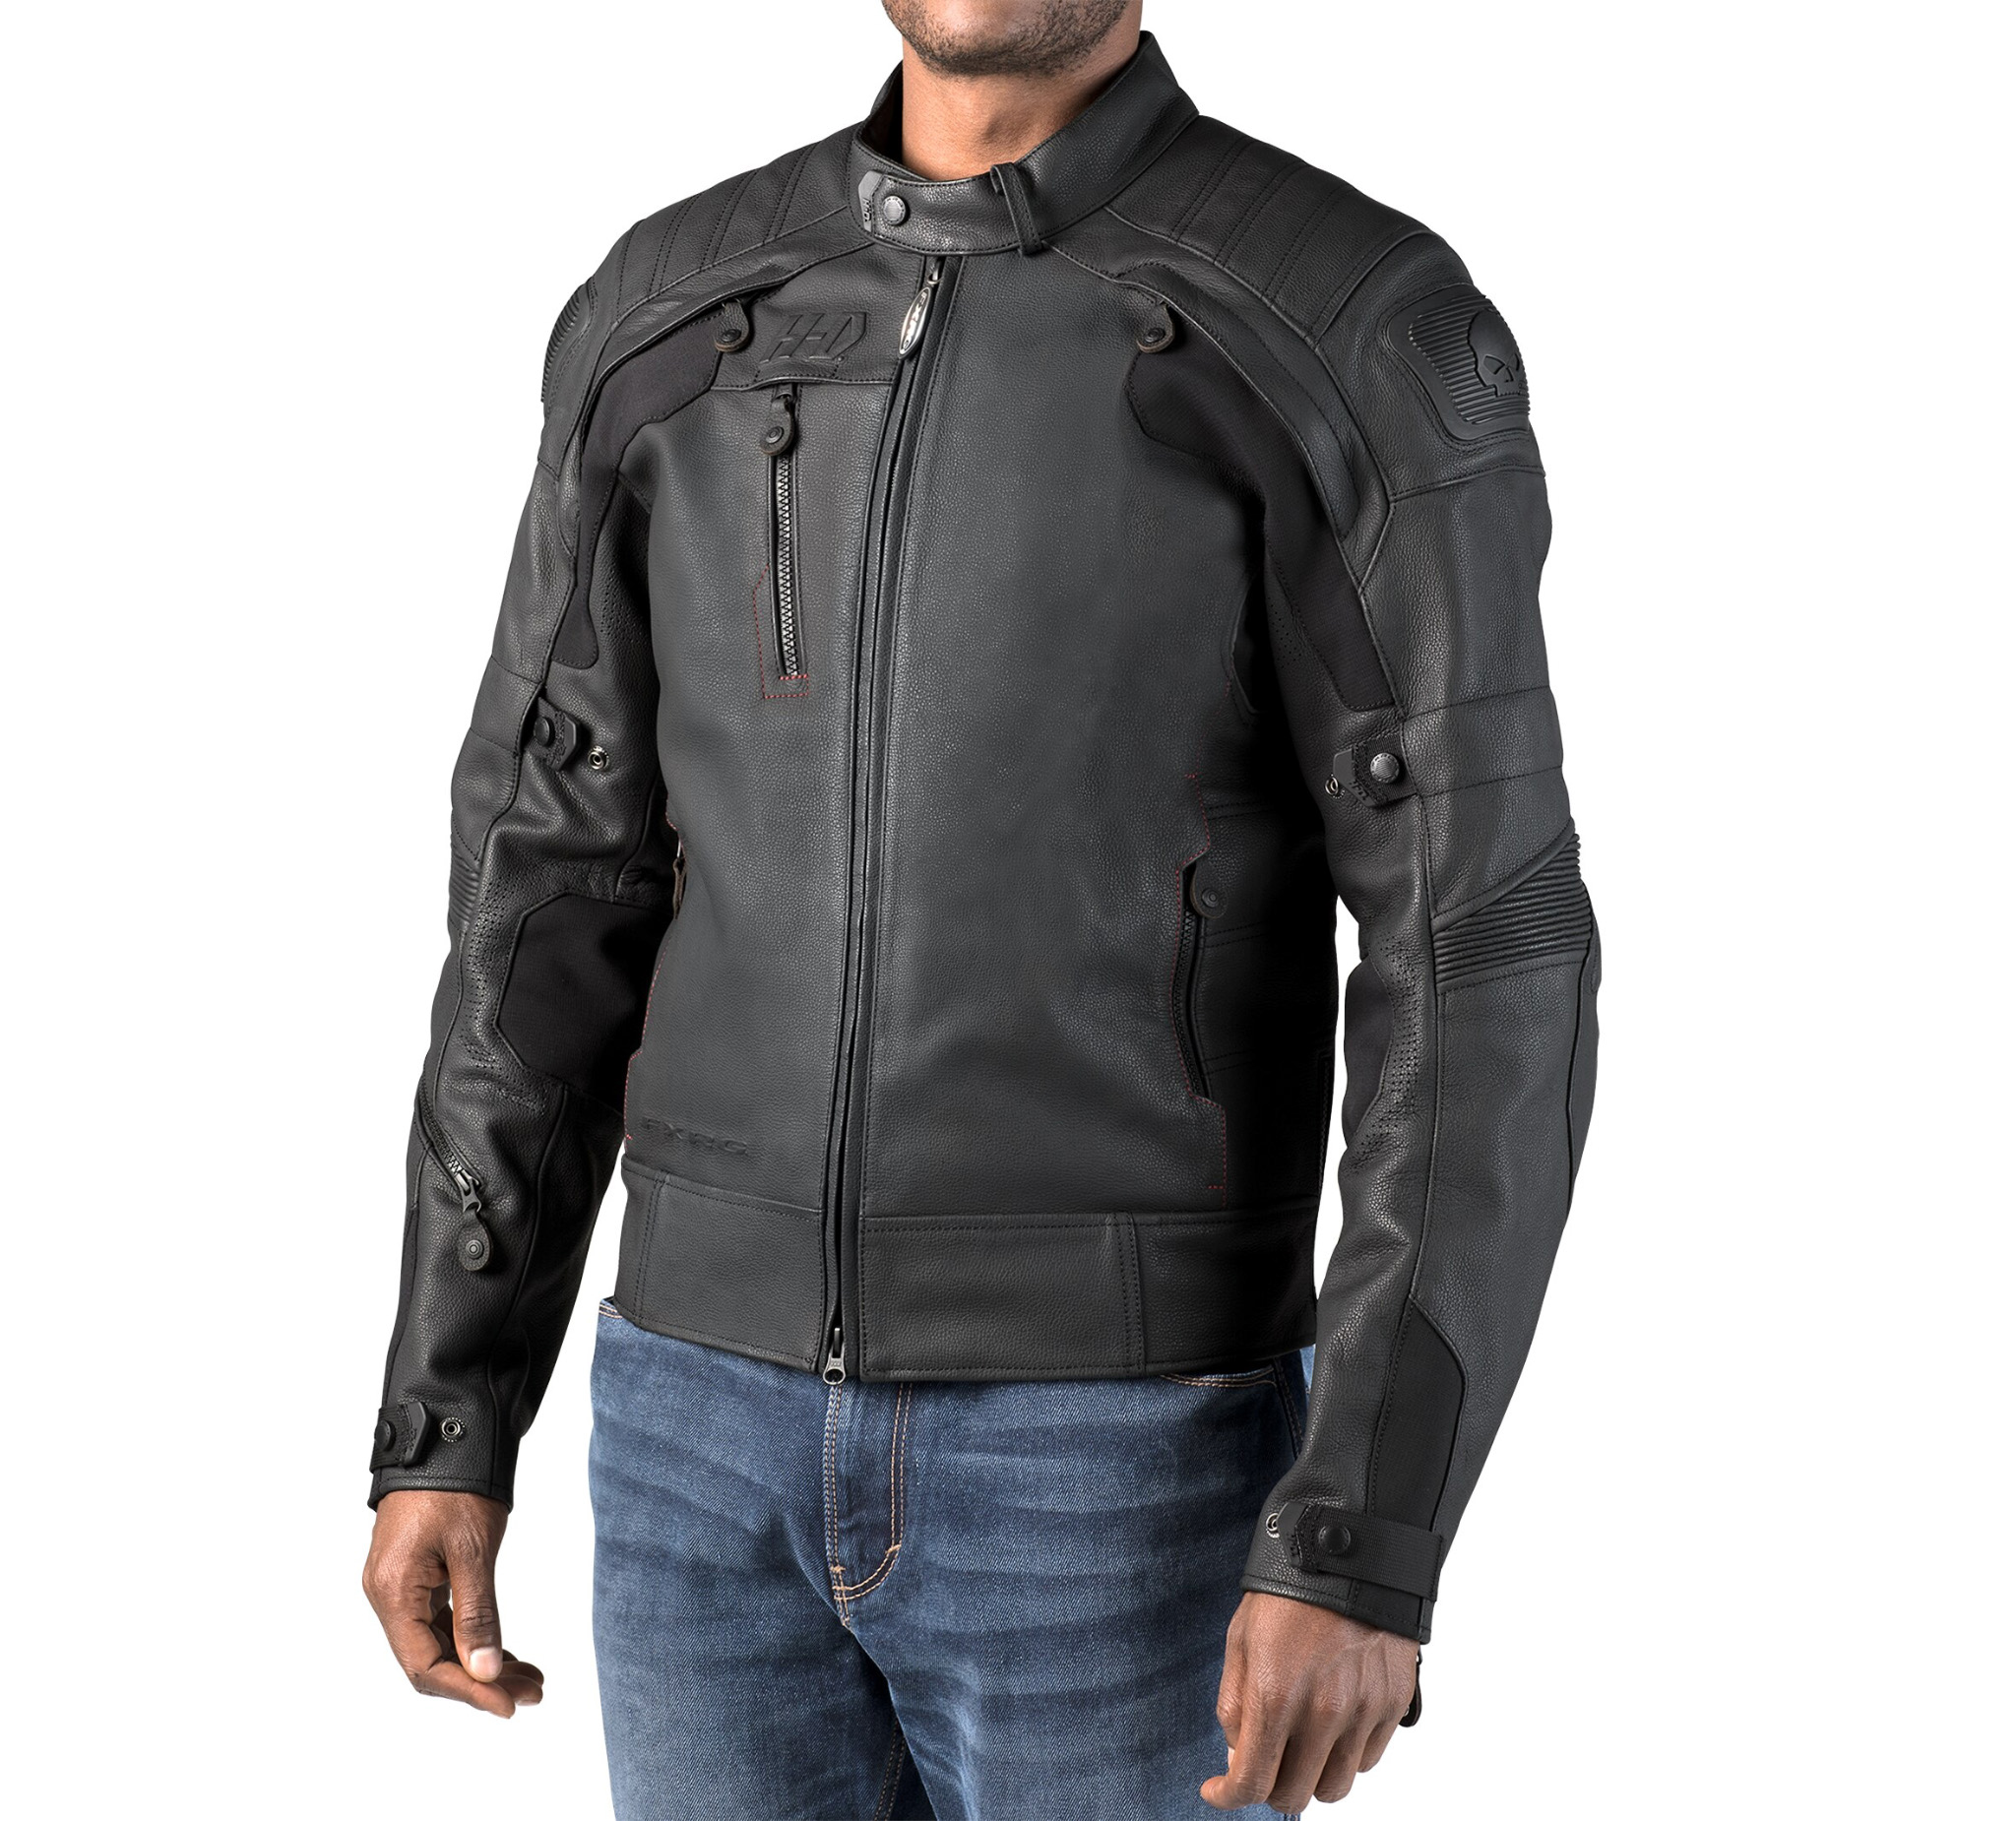 Men S Fxrg Gratify Leather Jacket With Coolcore Technology 98051 19vm Harley Davidson African Markets